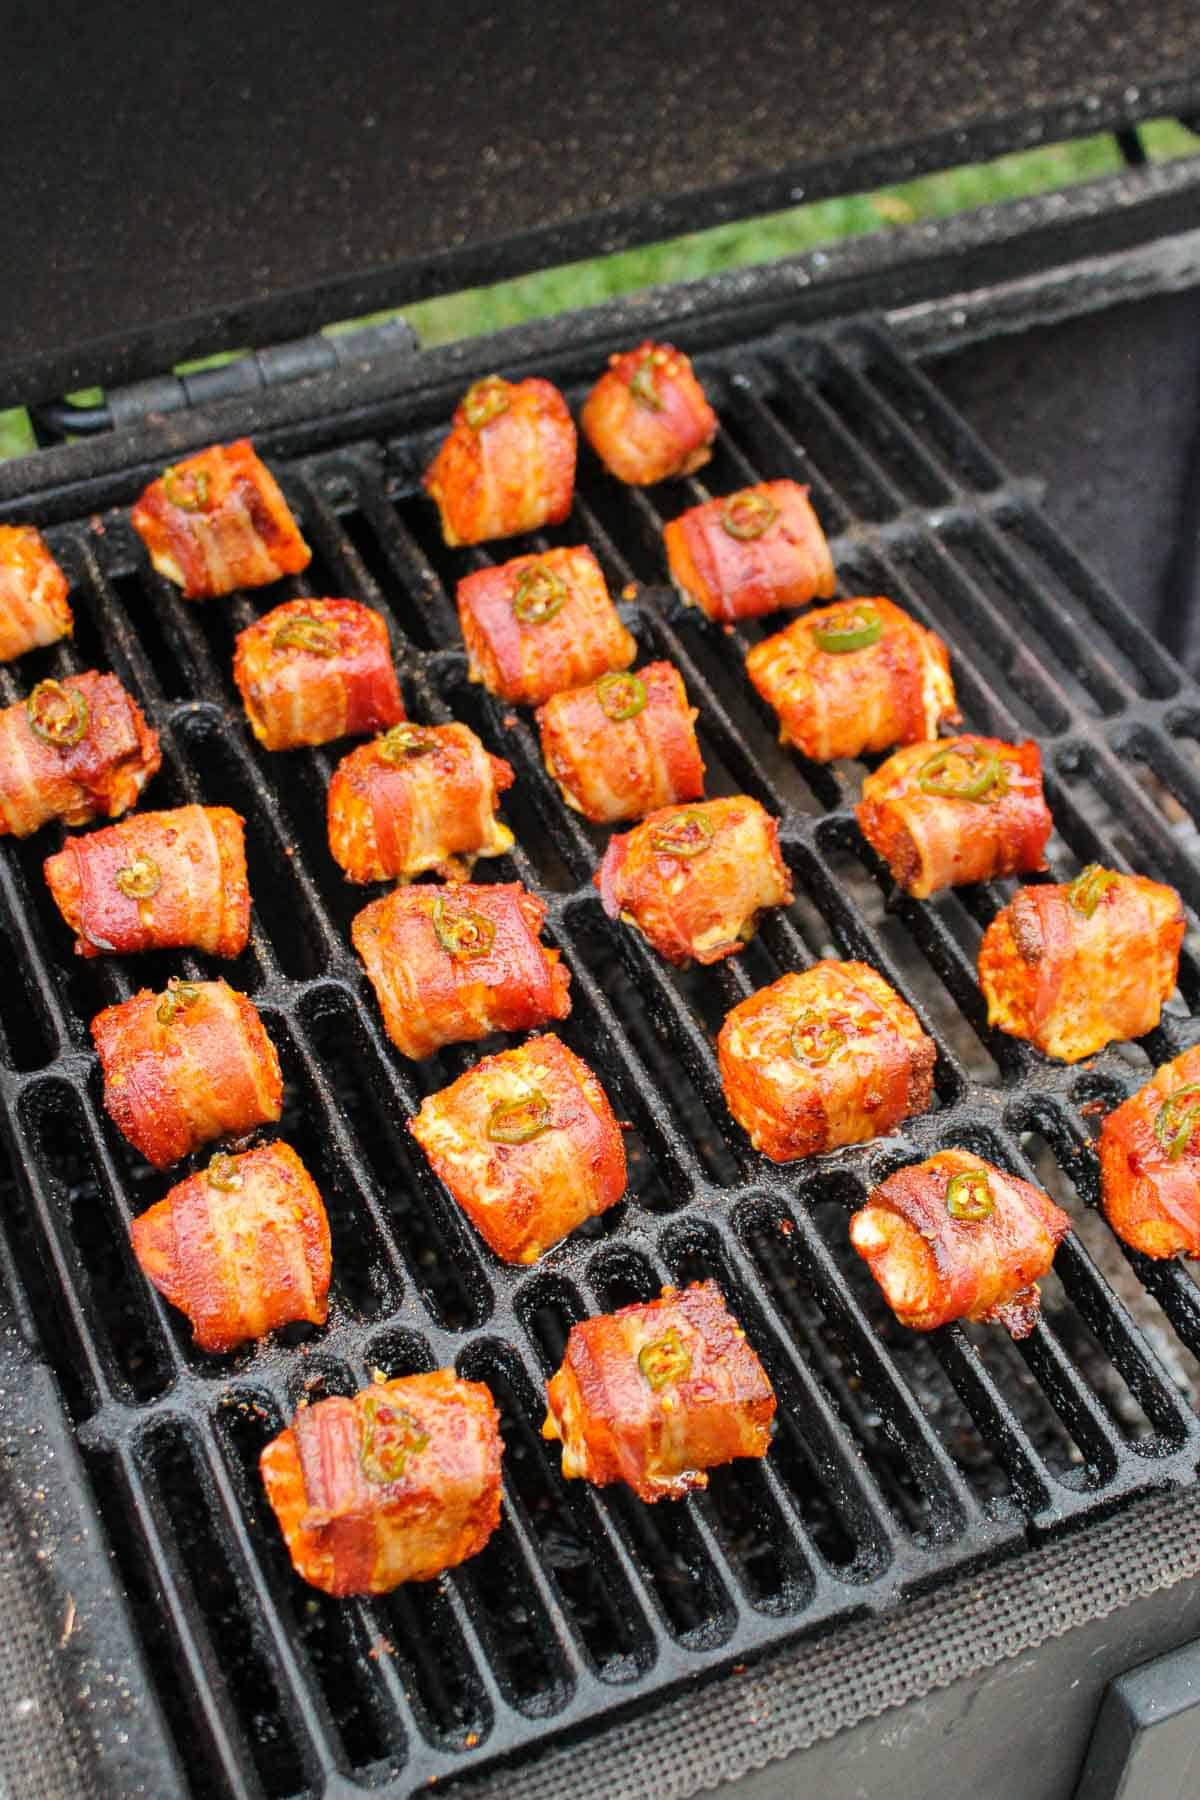 The glazed bites on the grill.